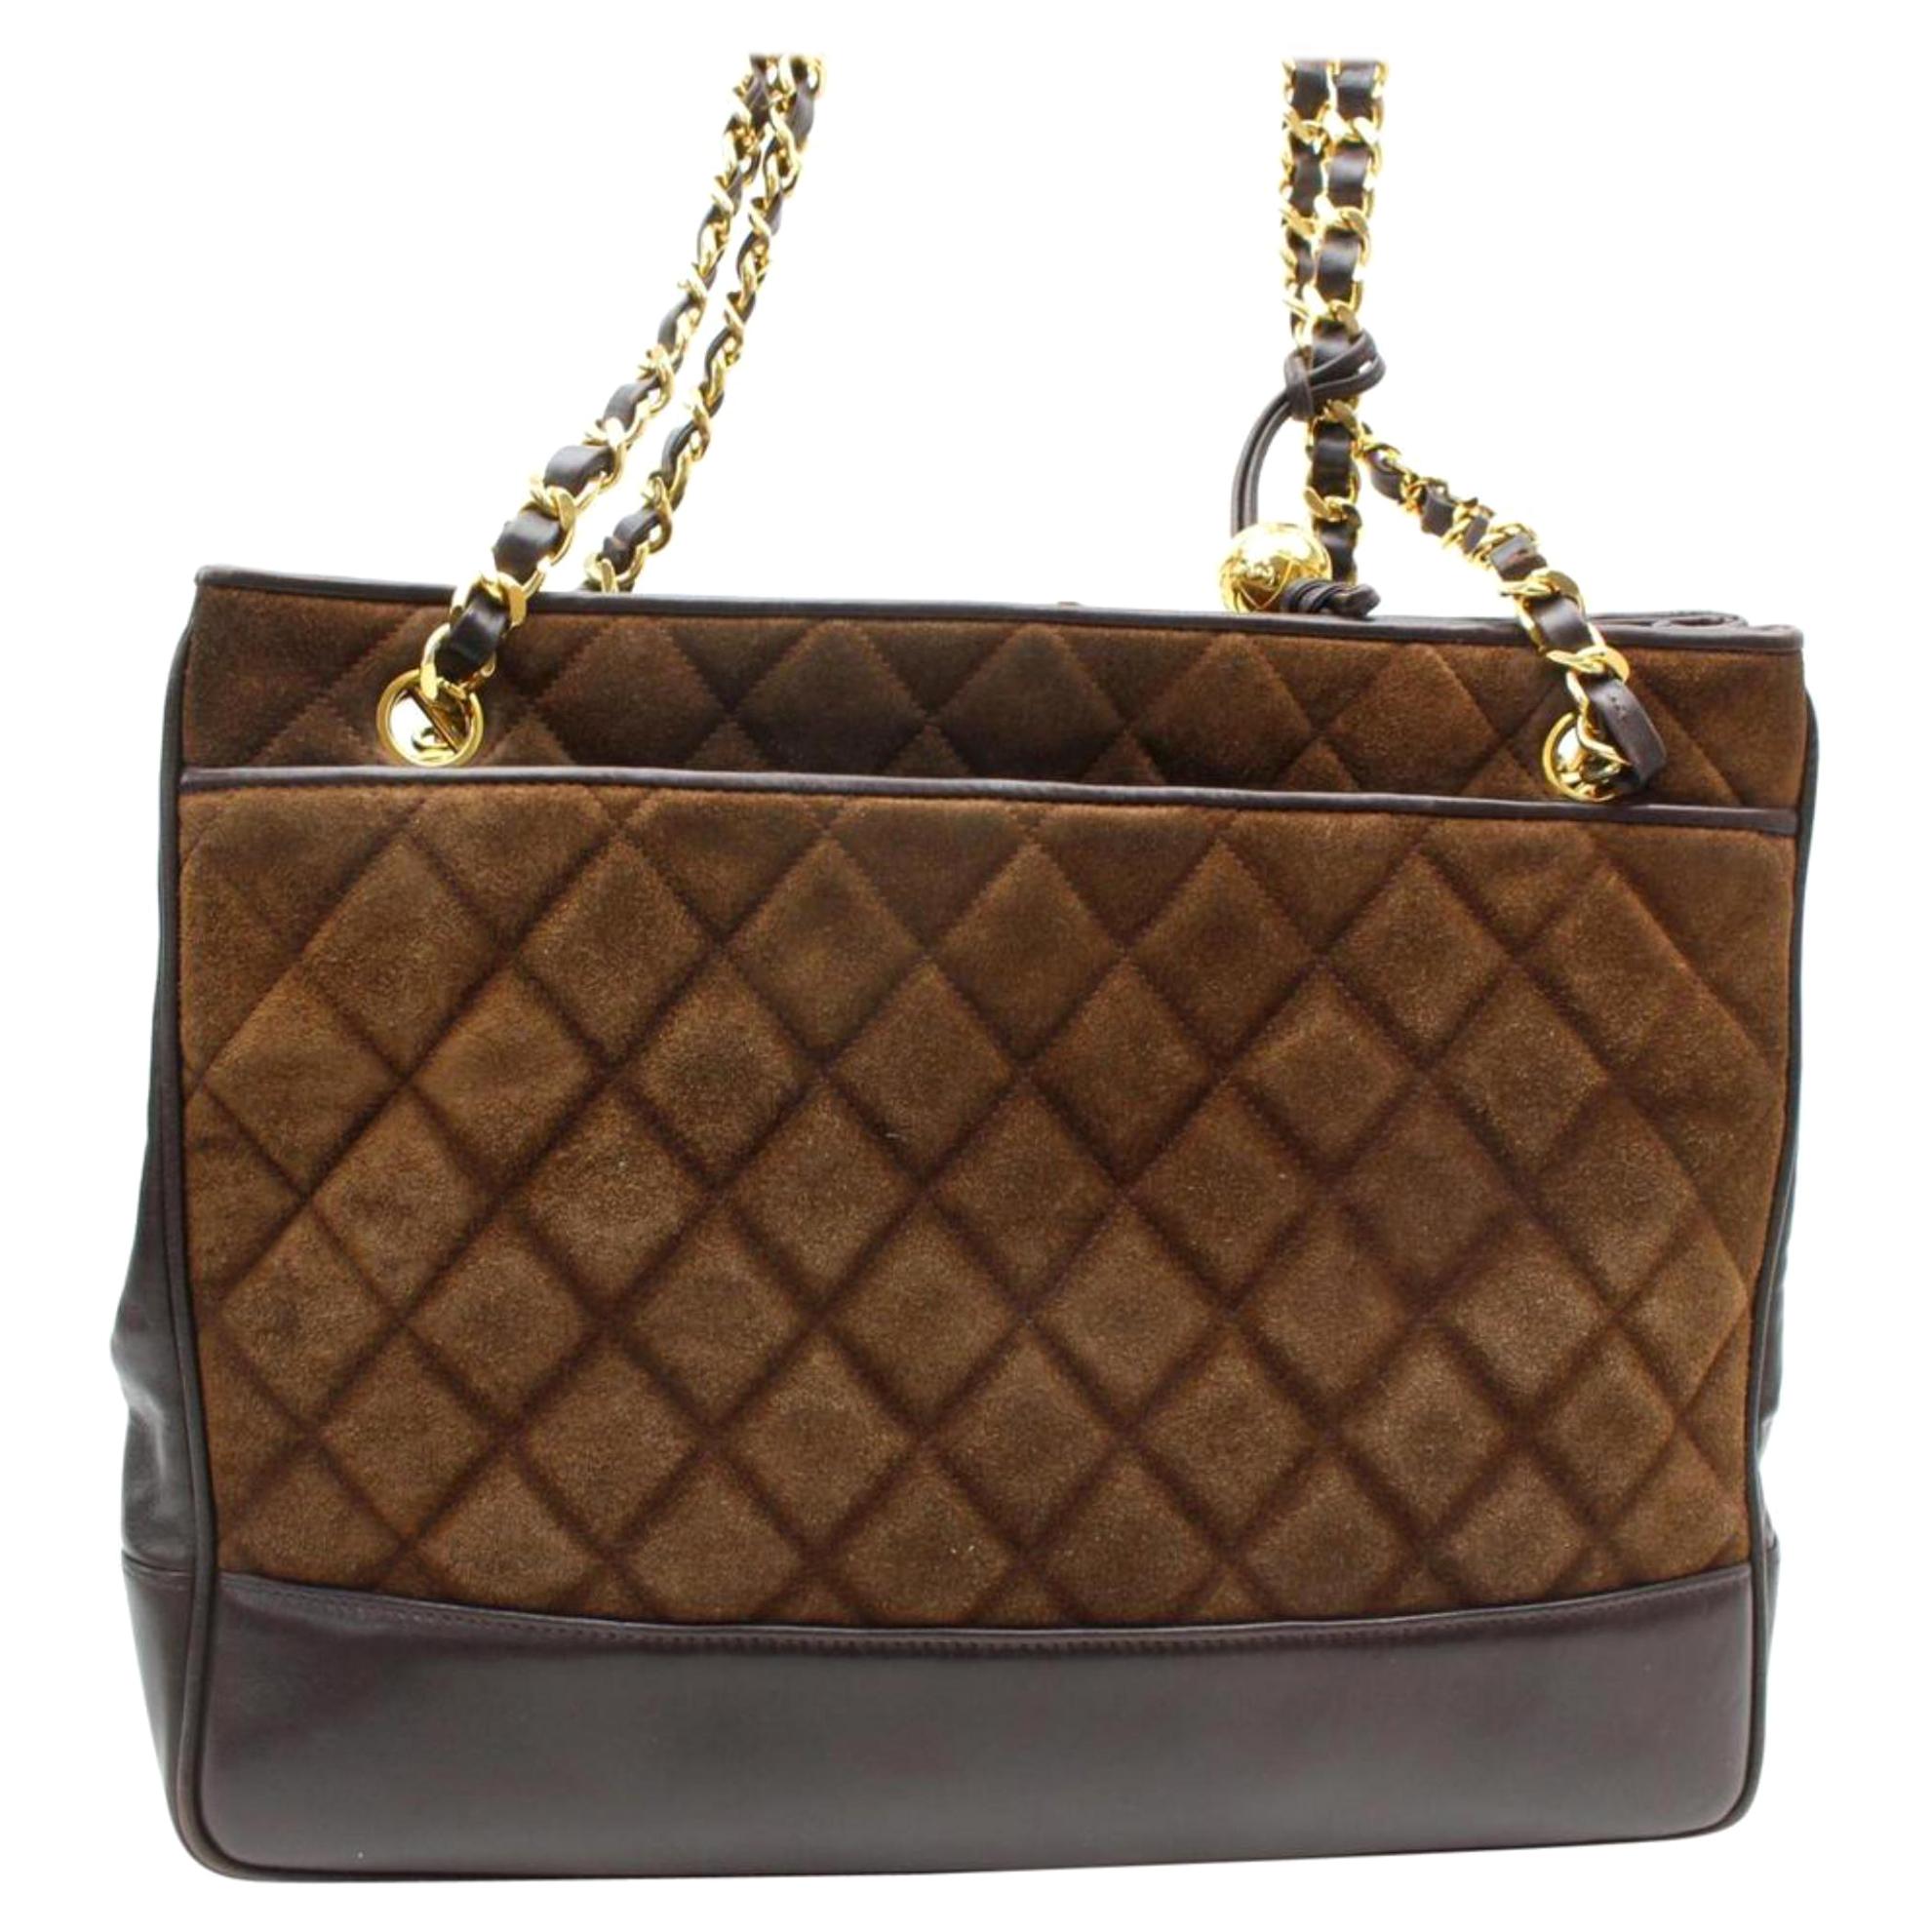 Chanel Quilted Chain Shopper Tote 869572 Brown Suede Leather Shoulder Bag For Sale